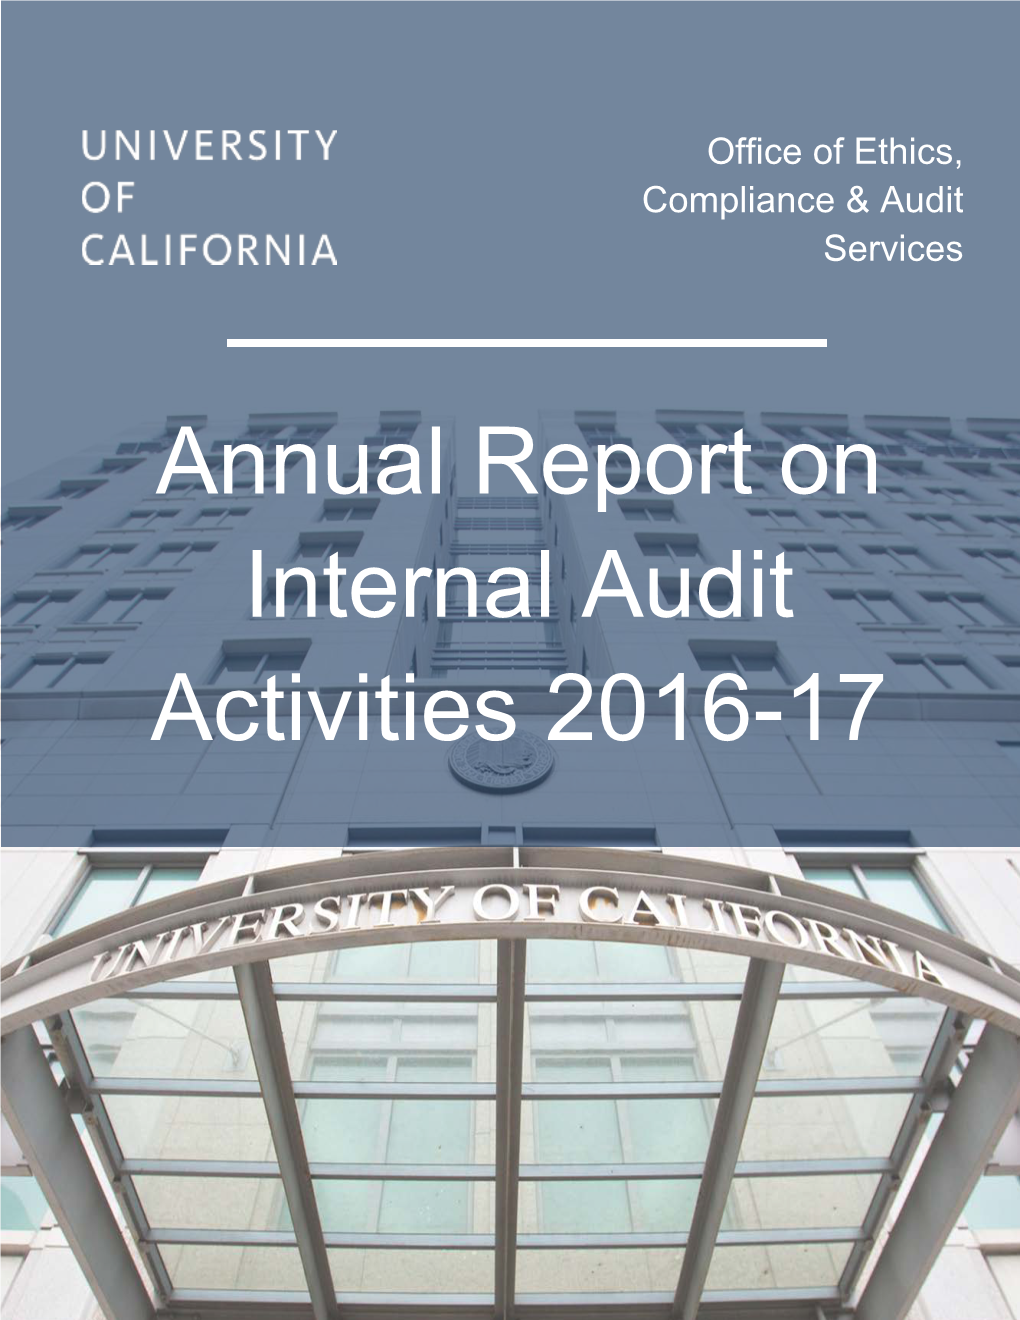 2016-2017 Annual Report on Internal Audit Activities